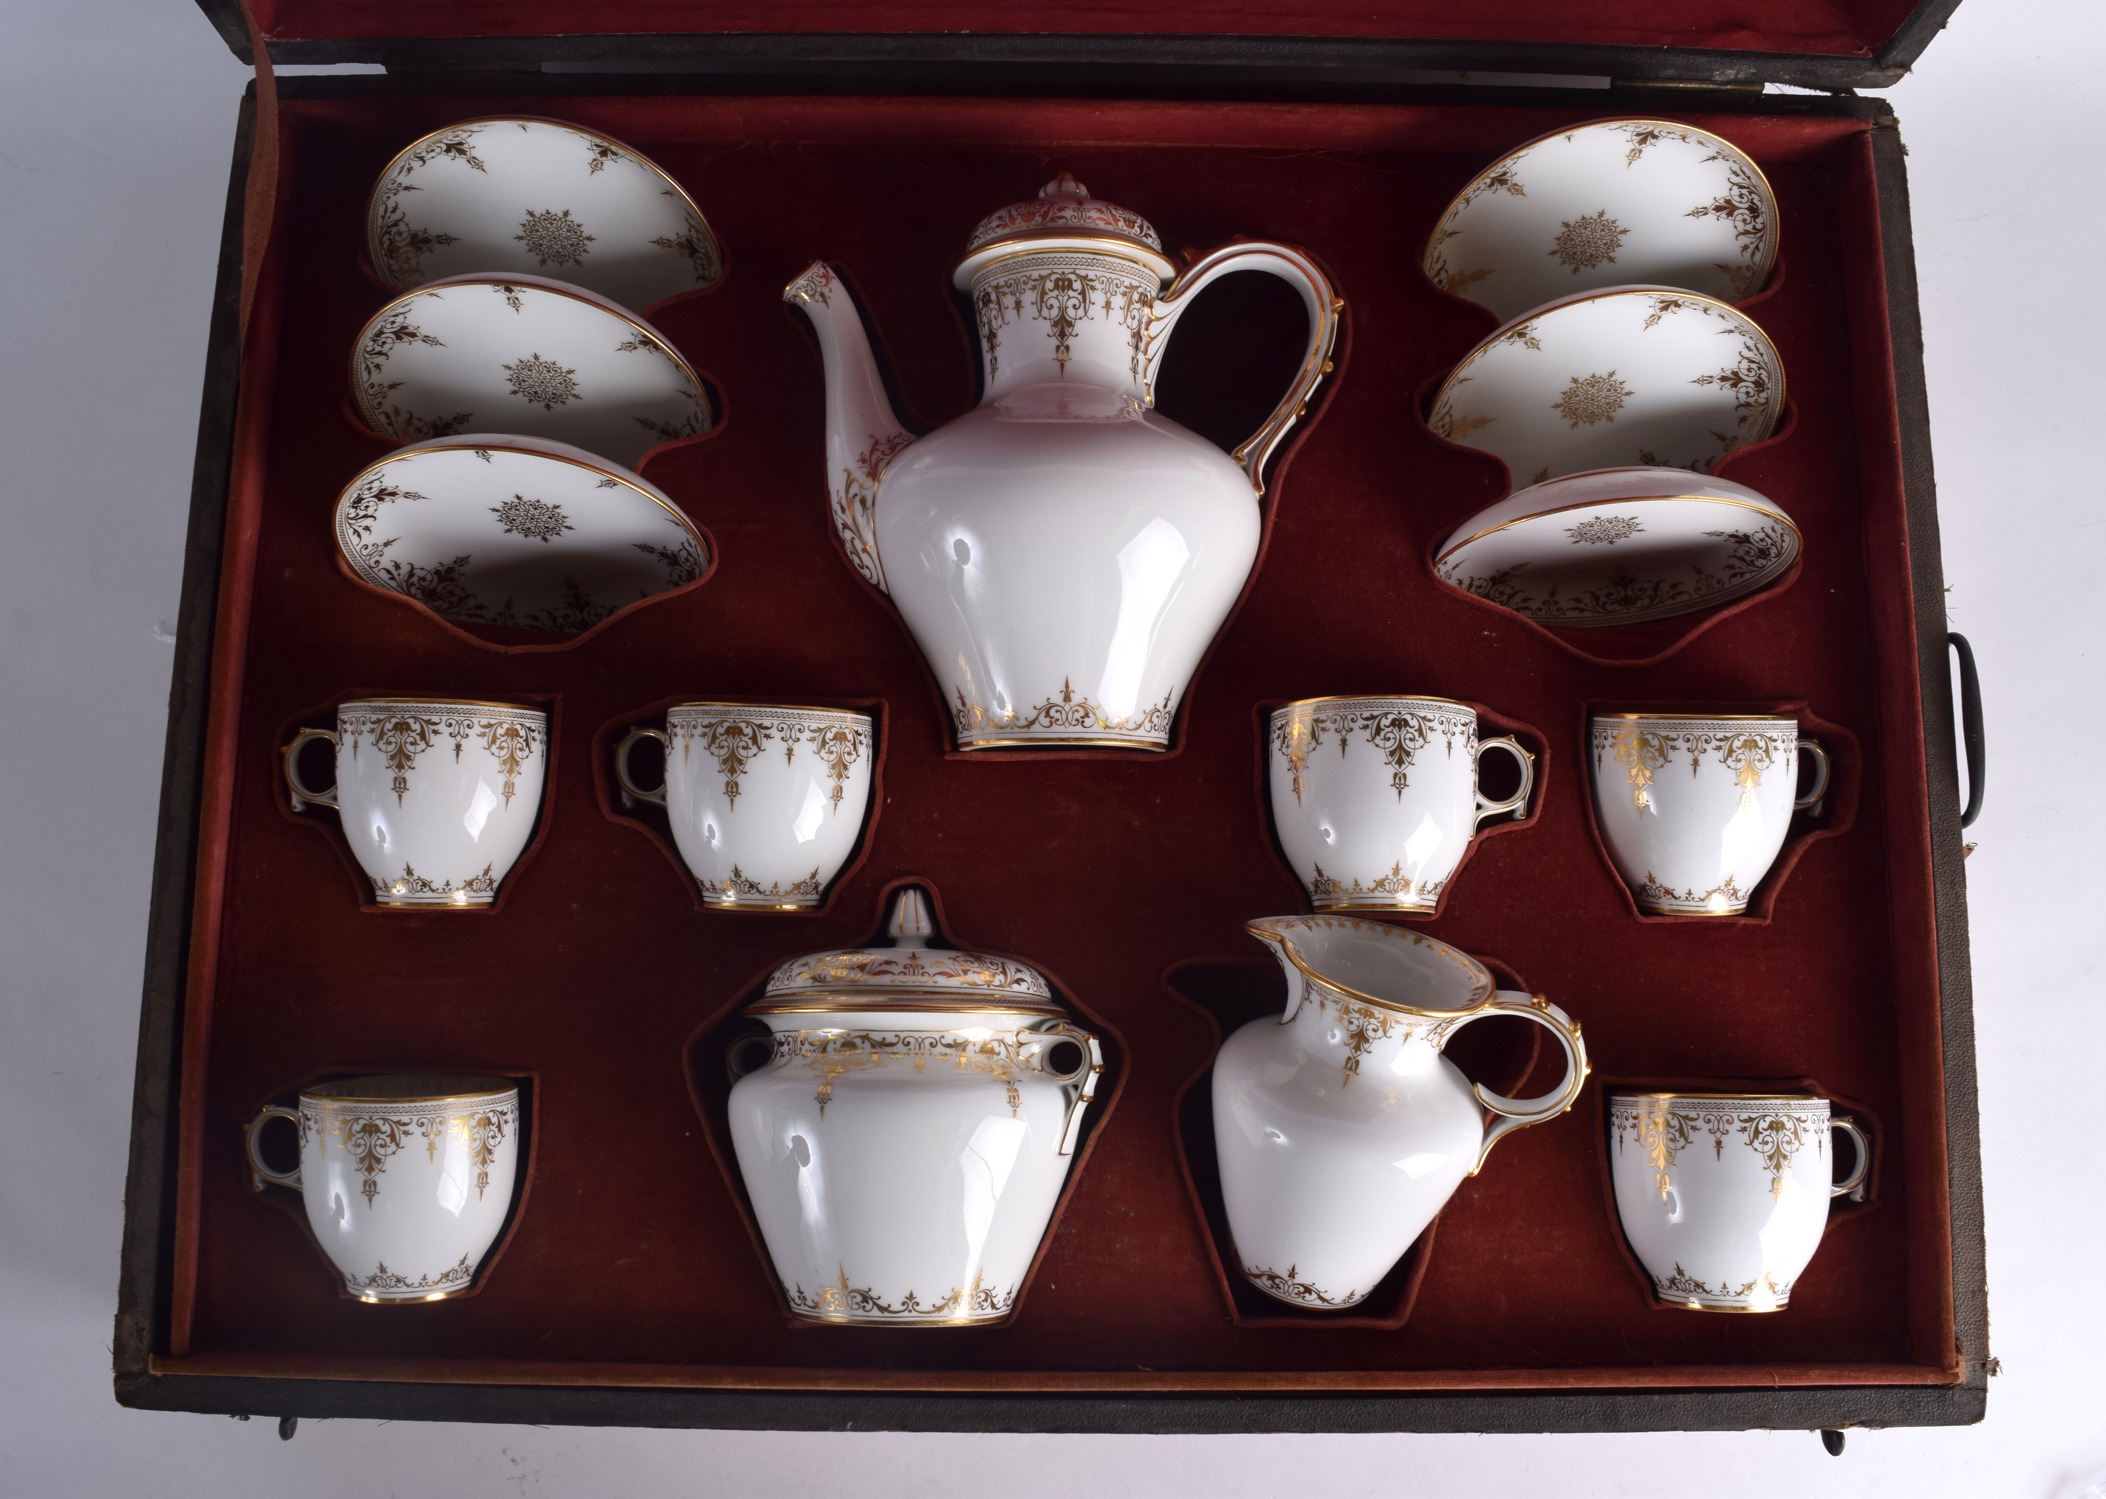 A GOOD CASED 19TH CENTURY FRENCH SEVRES PORCELAIN TEASET painted with rich gilt scrolling foliage.